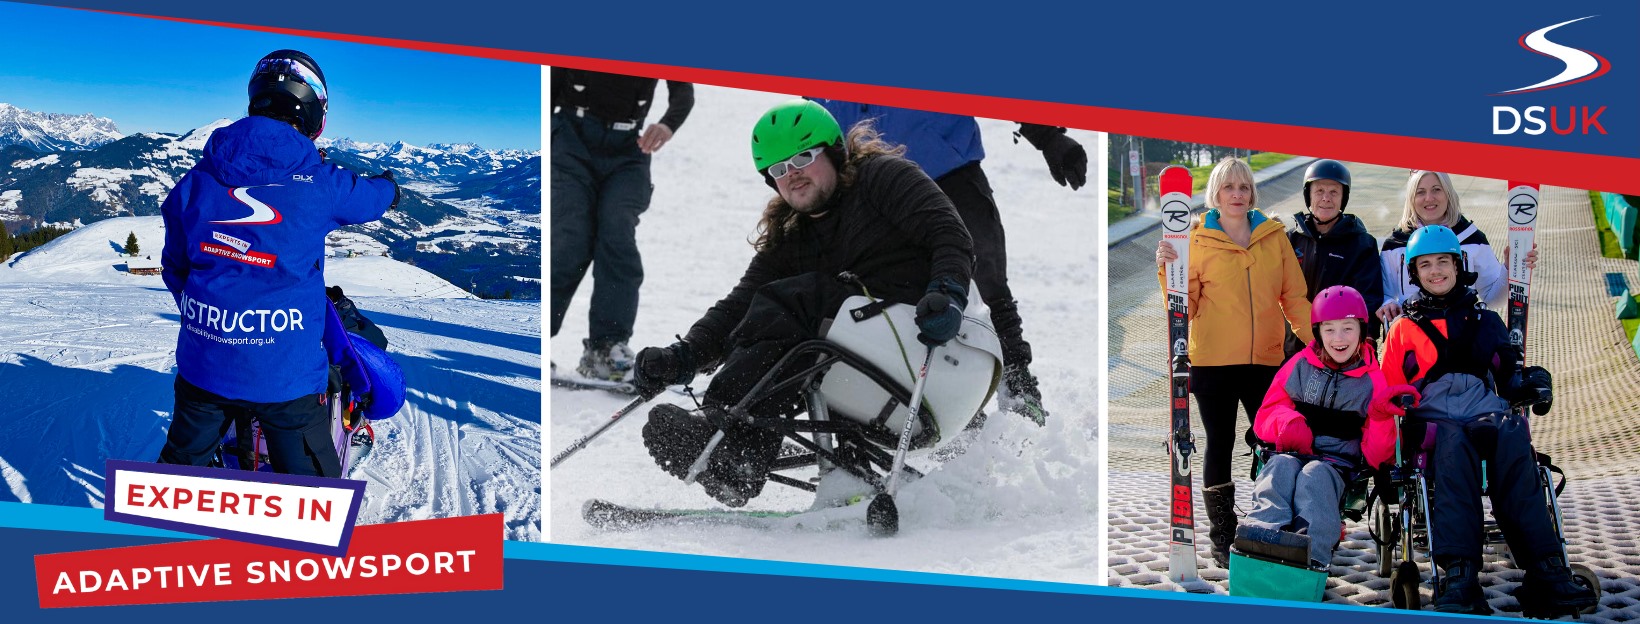 Welcoming everyone and adaptive snowsport: International Day of People with Disabilities 2021